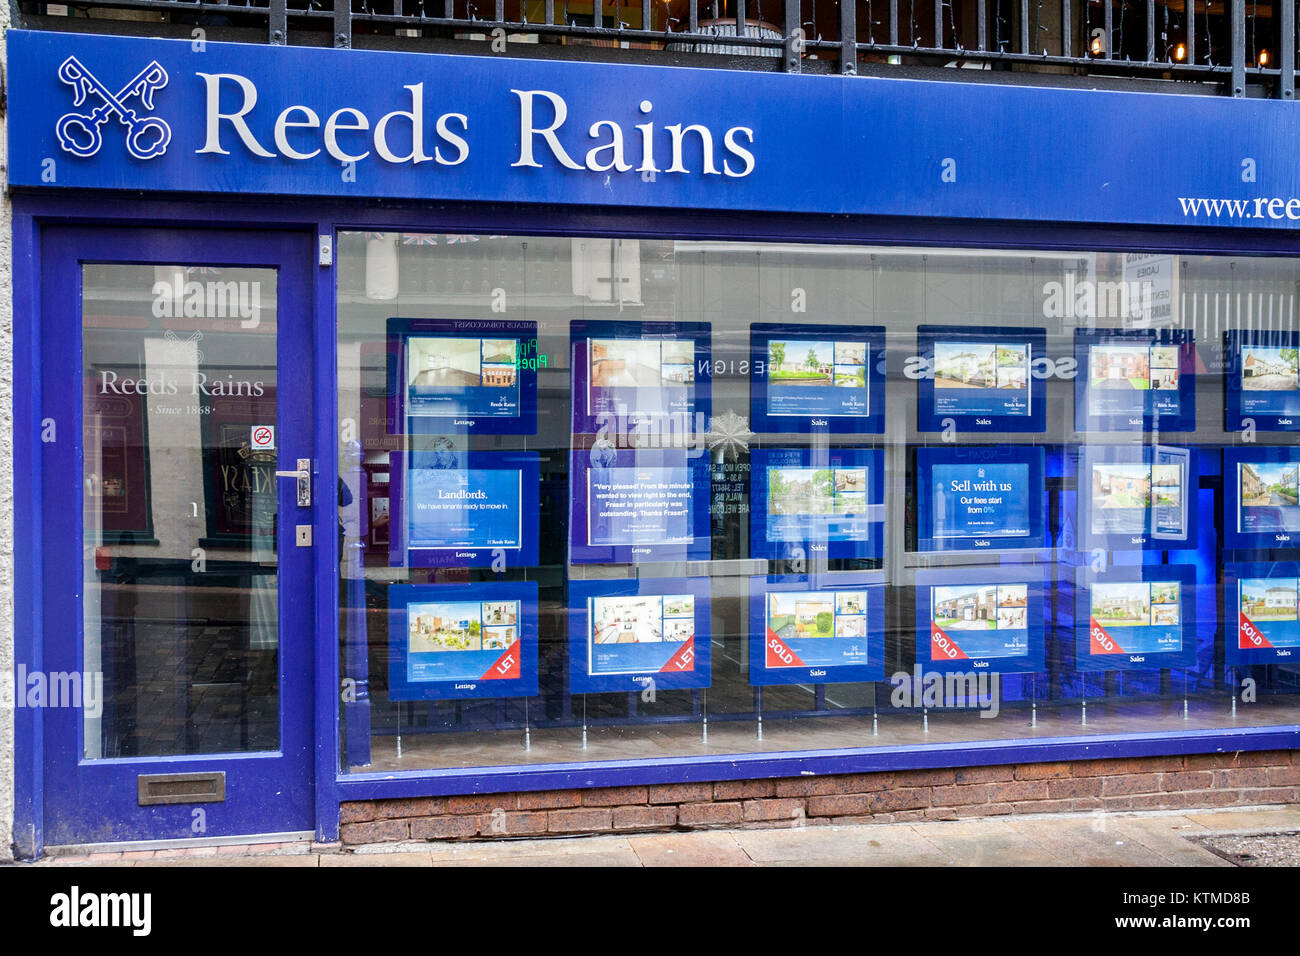 Reeds Rains Real Estate Agents Selling Letting Property Chester Uk KTMD8B 